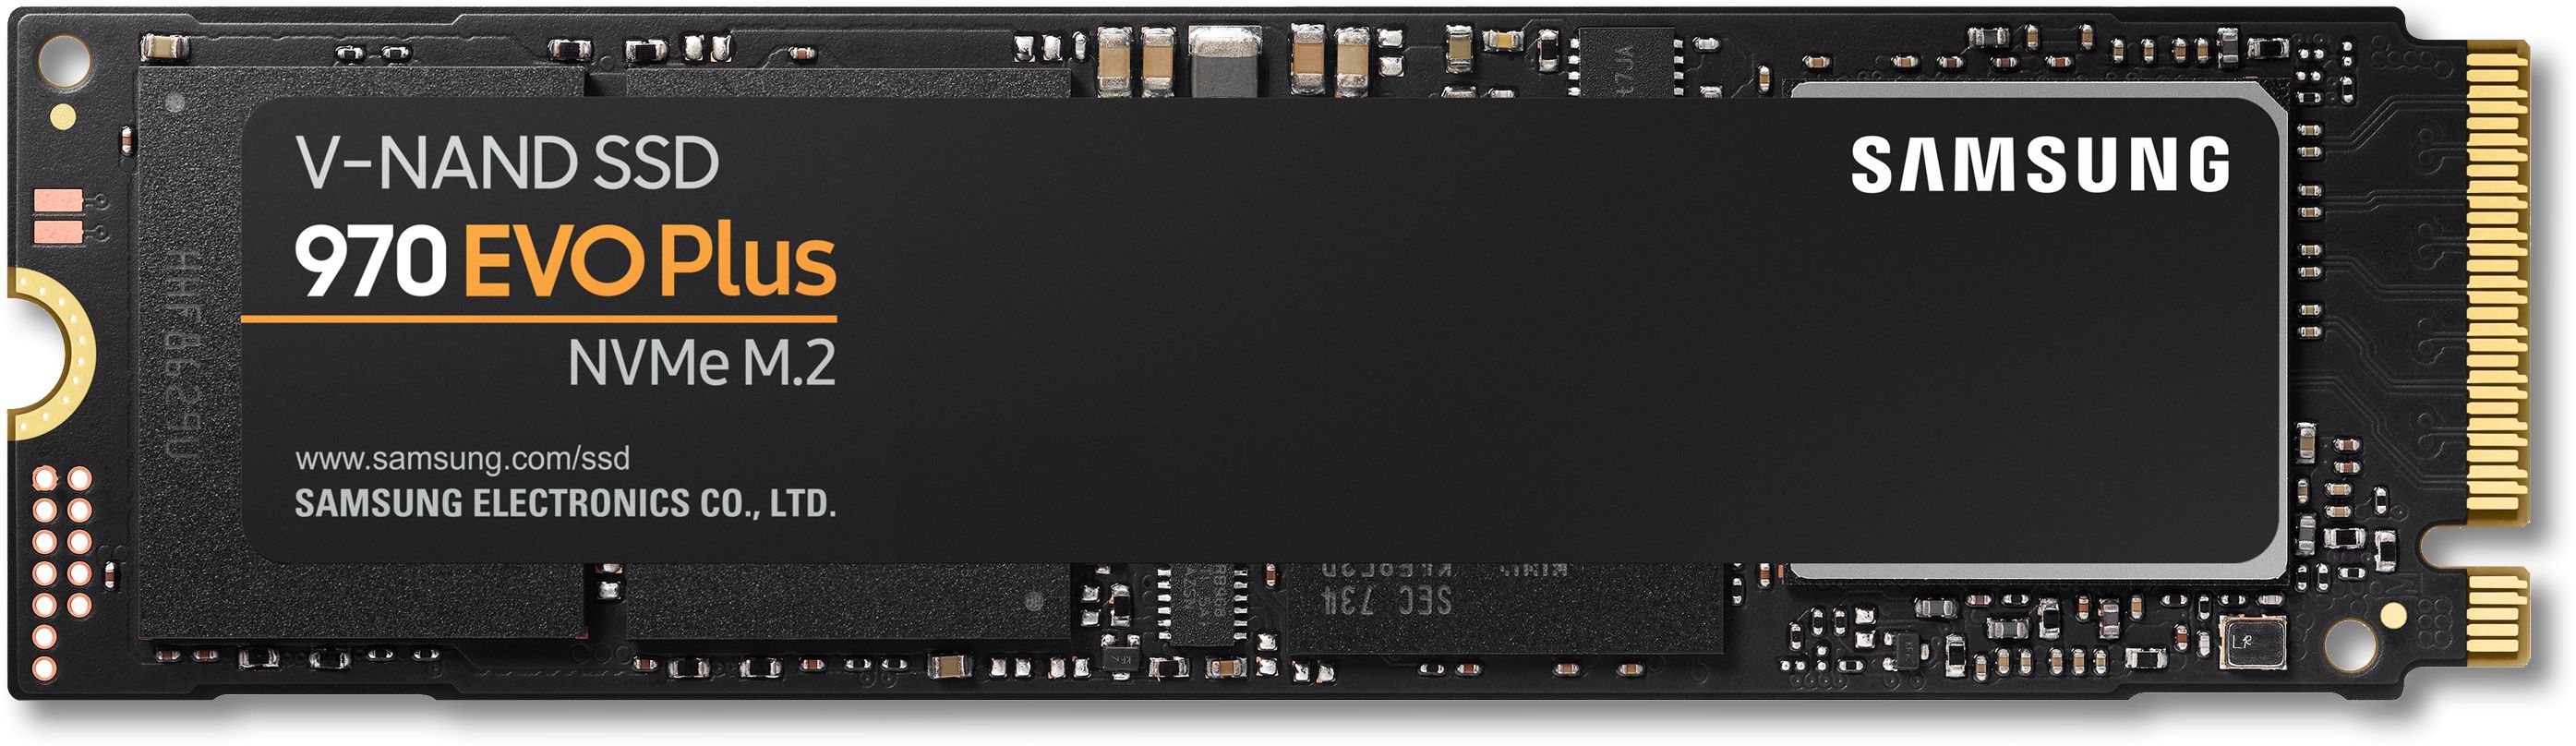 Samsung 970 Evo Plus Nvme M 2 Solid State Drives